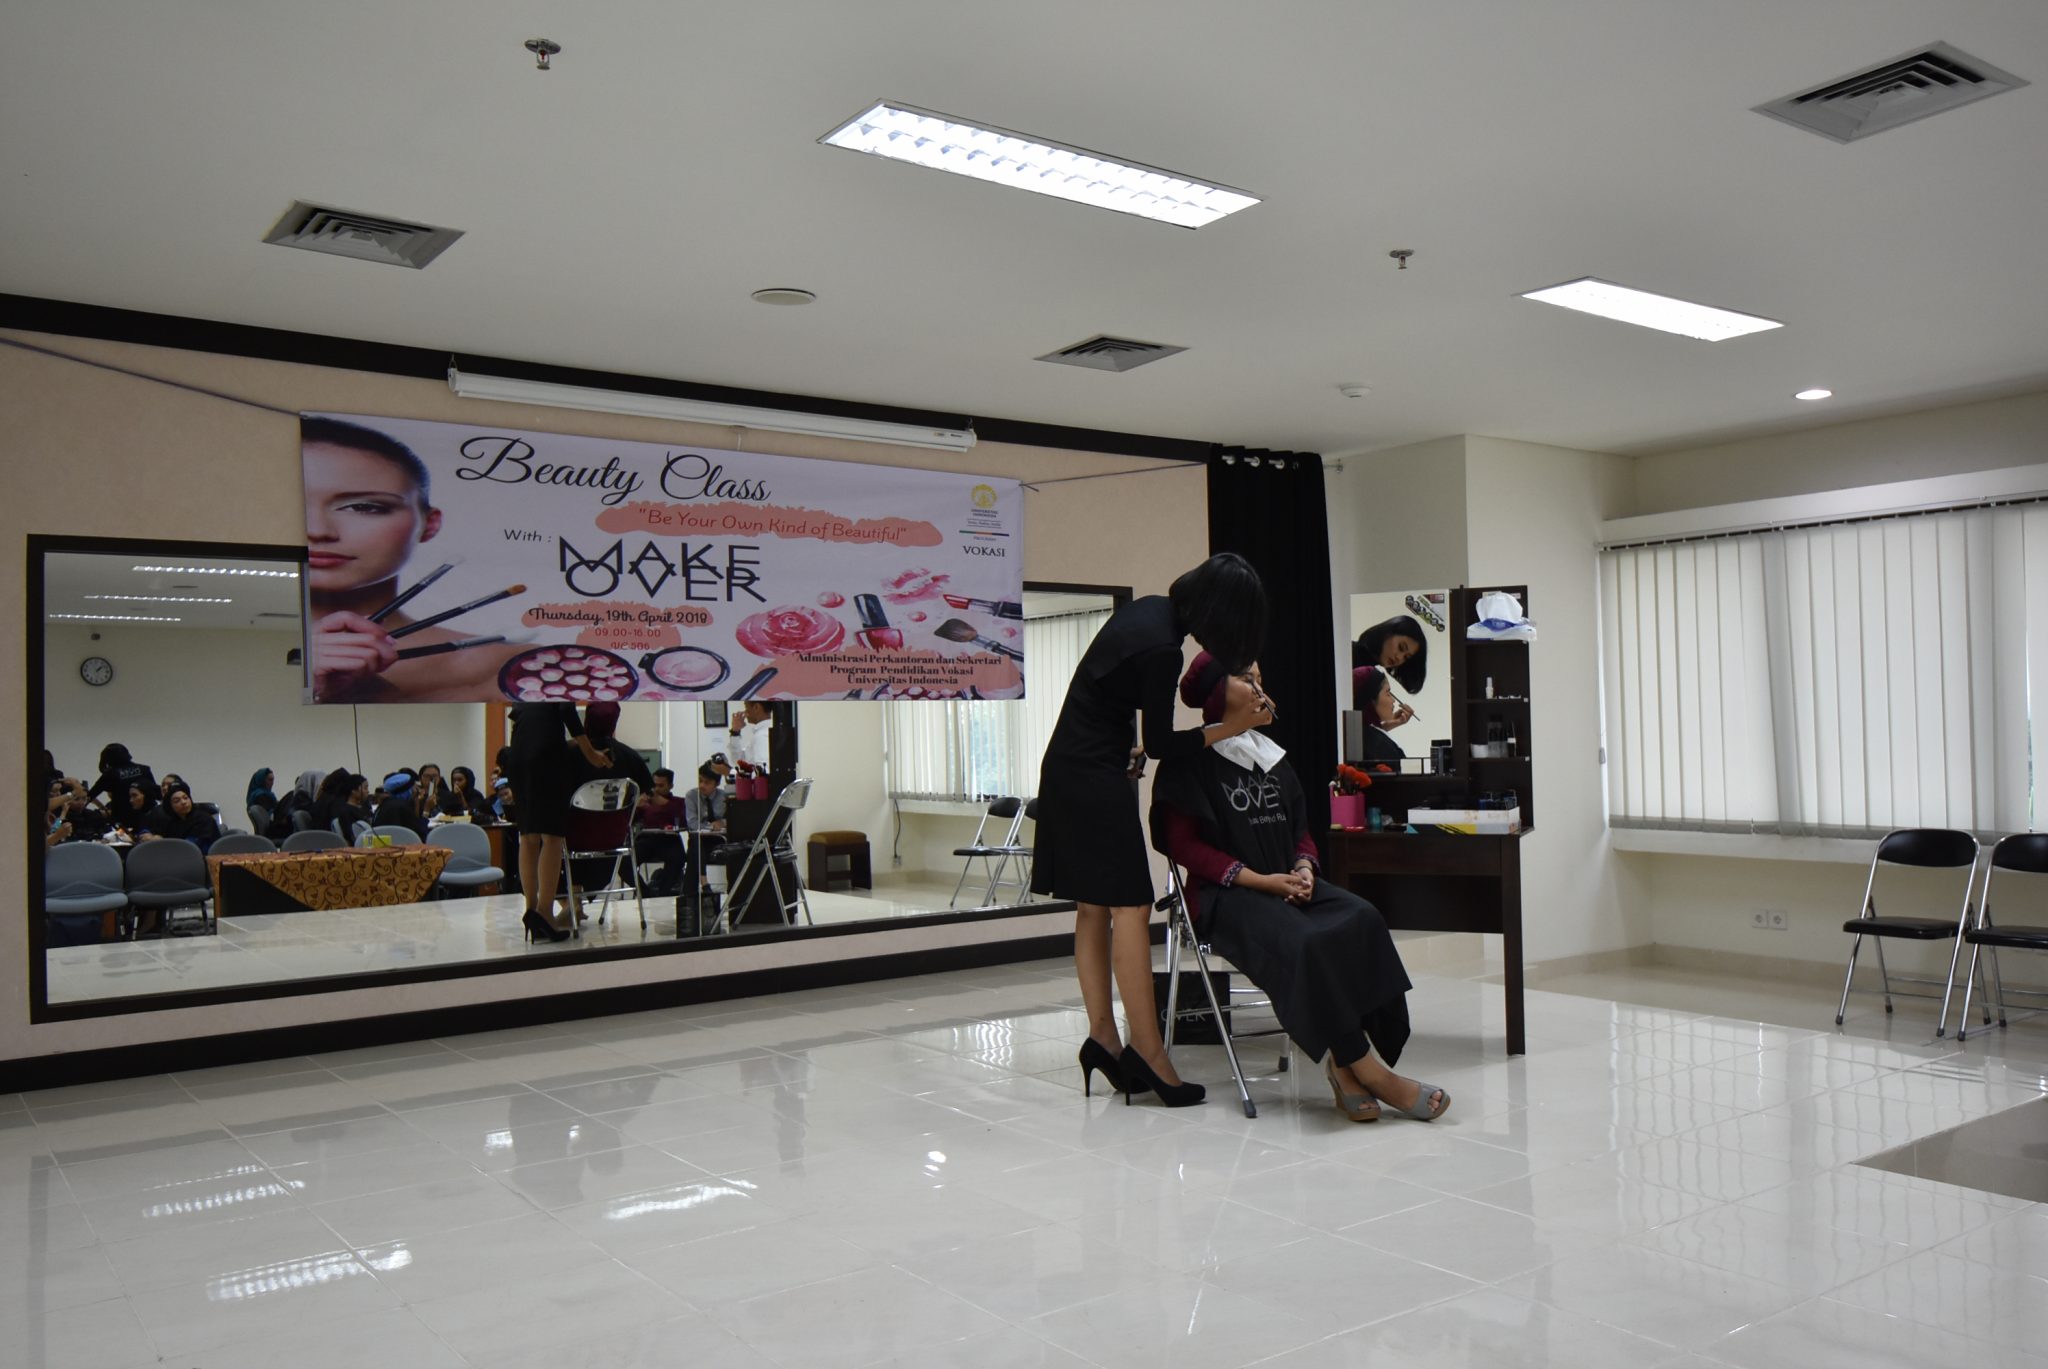 Beauty Class “Be Your Own Kind of Beautiful” oleh MakeOver